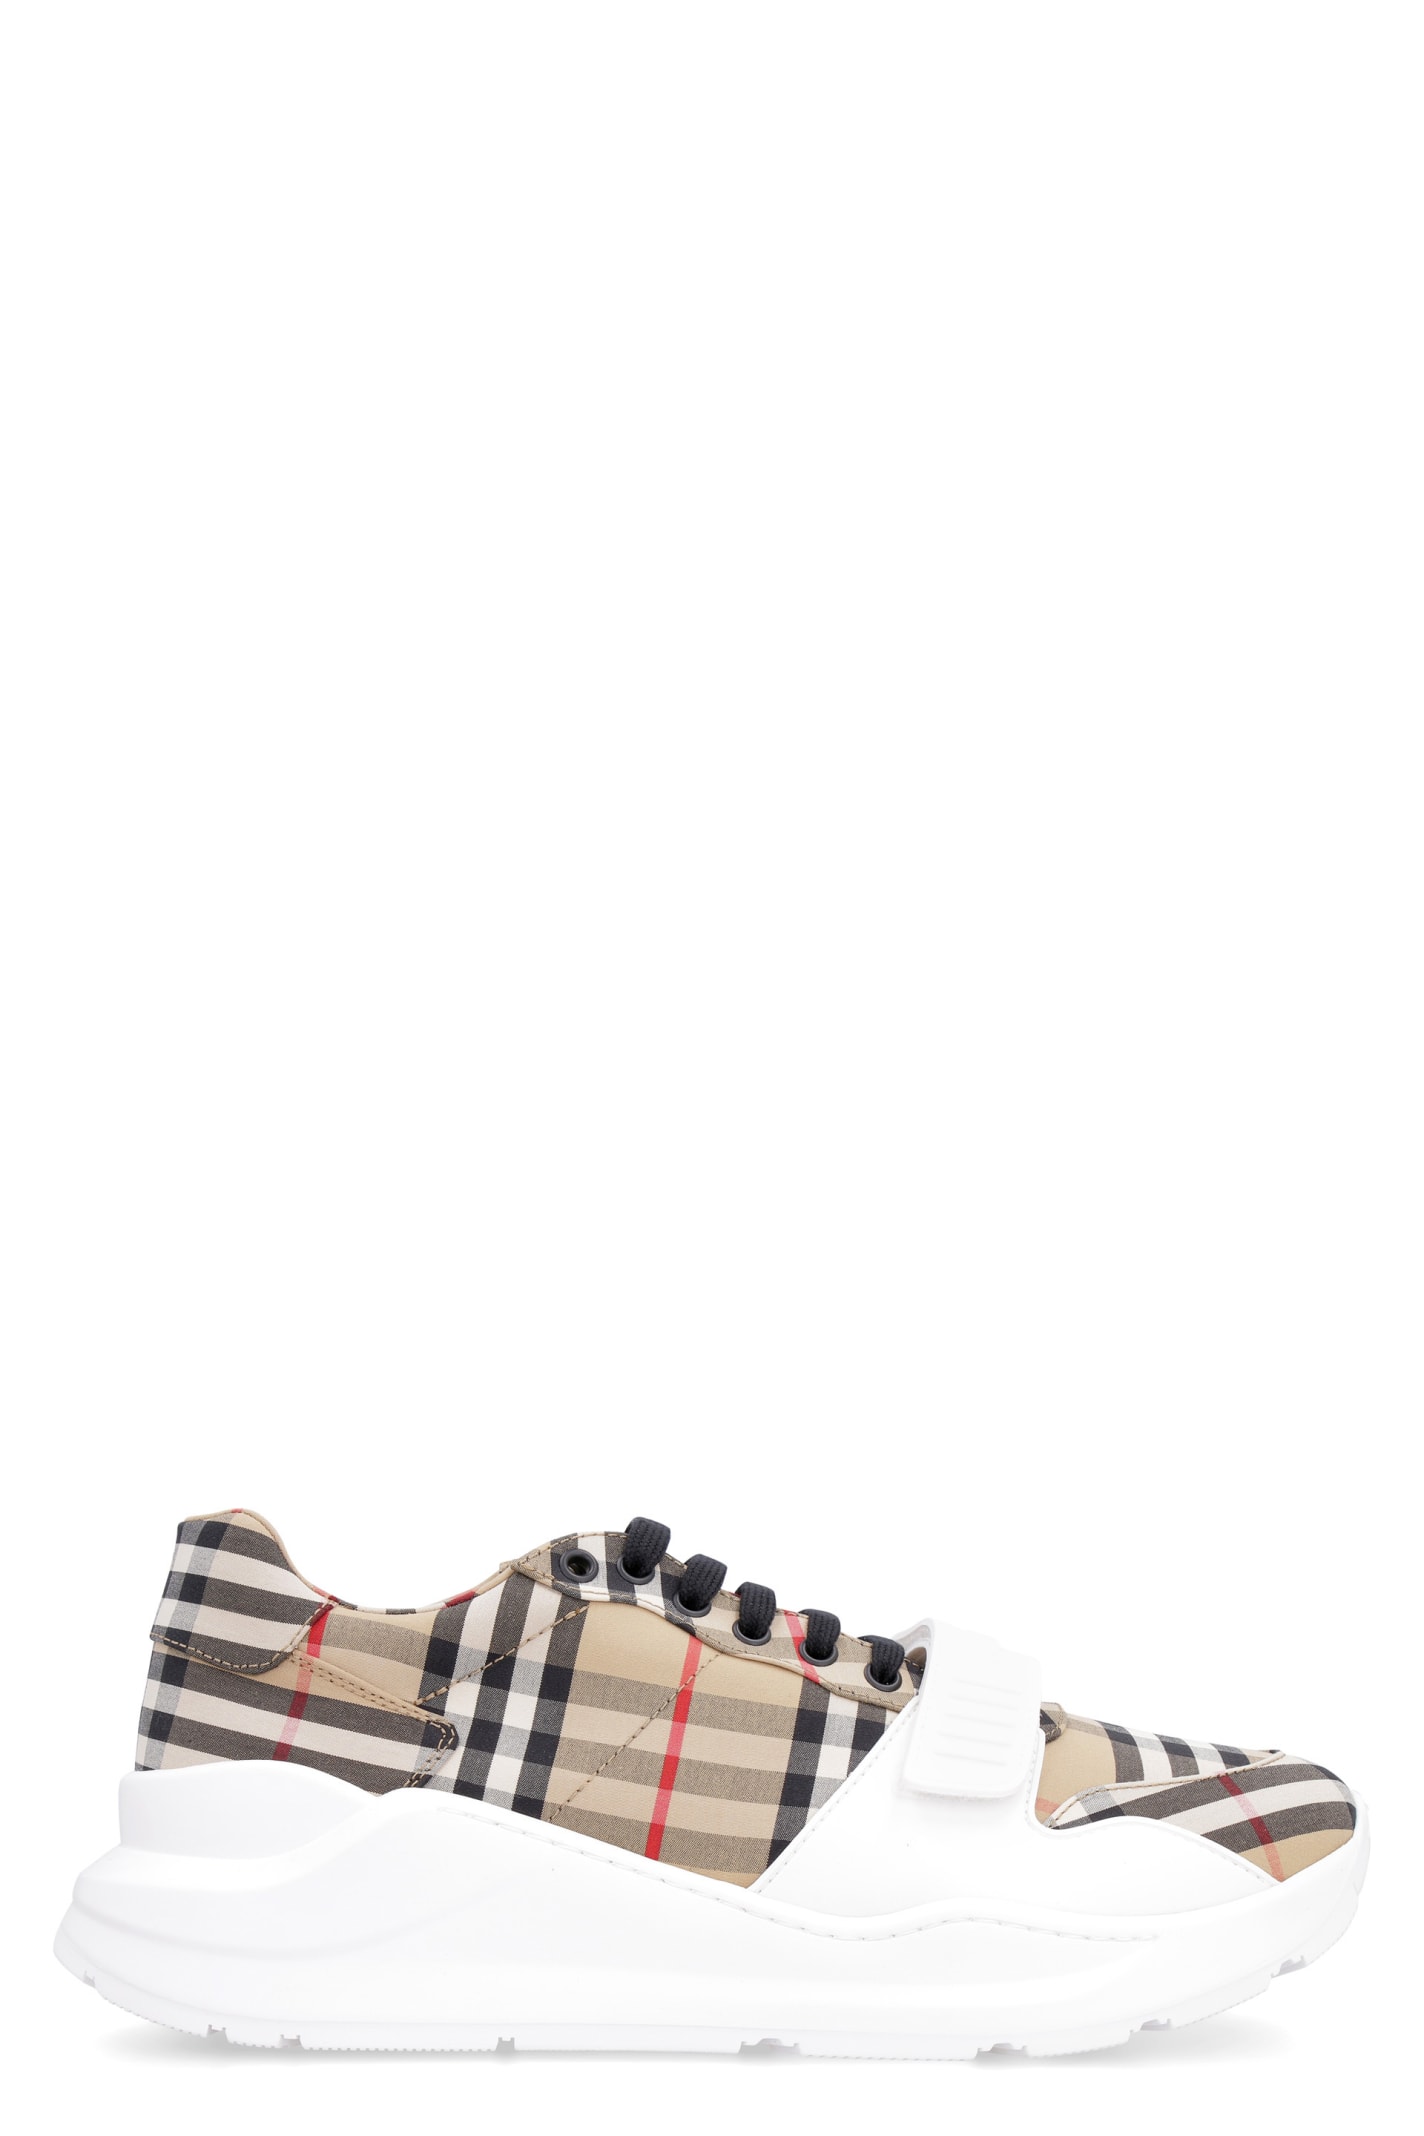 Burberry Vintage Check Printed Canvas Sneakers